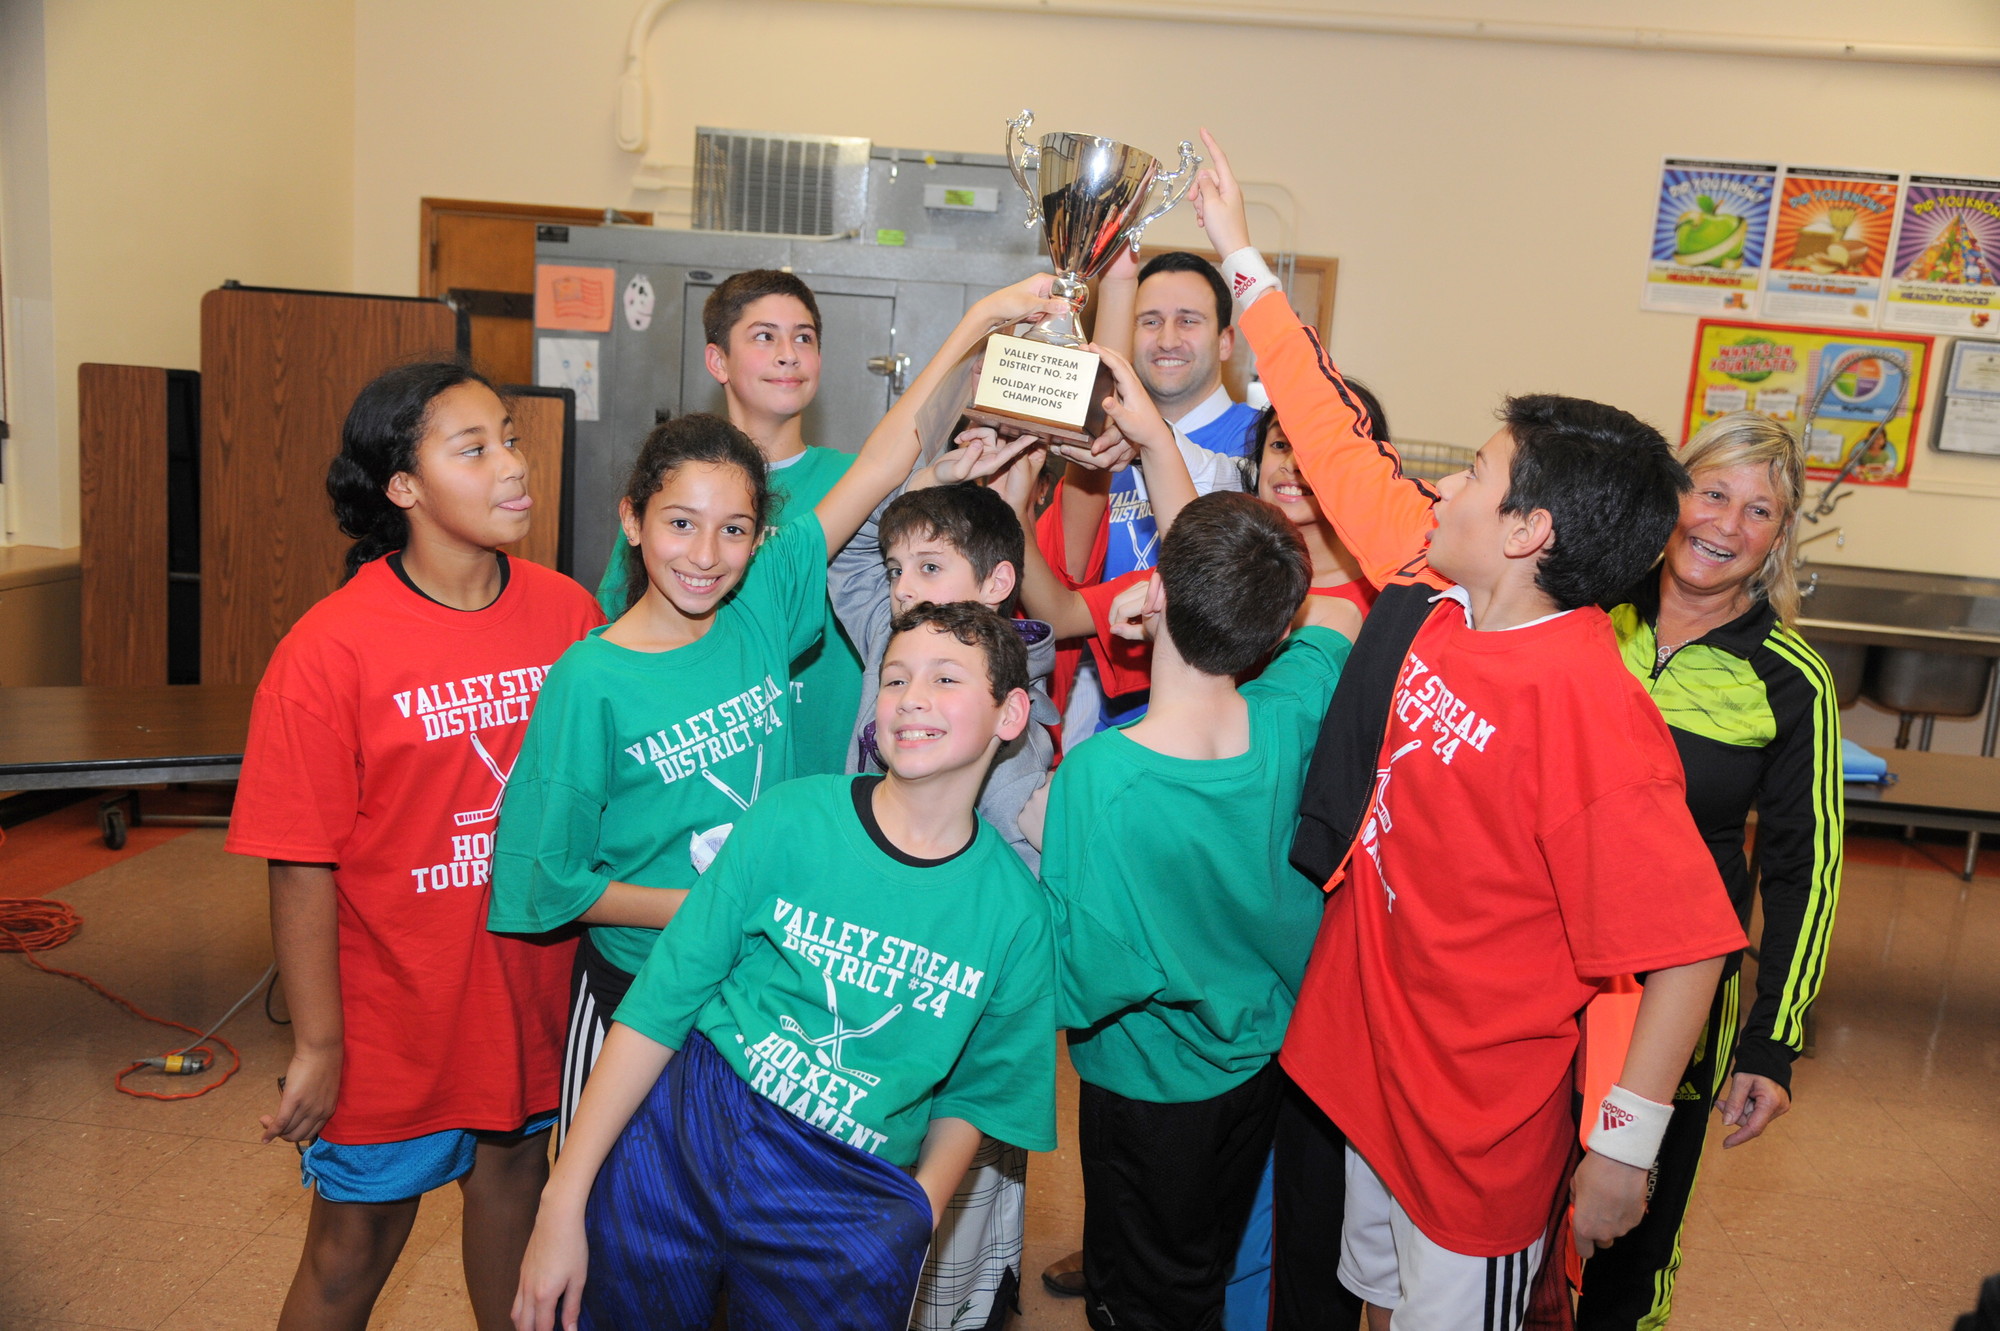 Students From the Robert W. Carbonaro School celebrated their victory in District 24’s annual floor hockey tournament on Jan. 14.